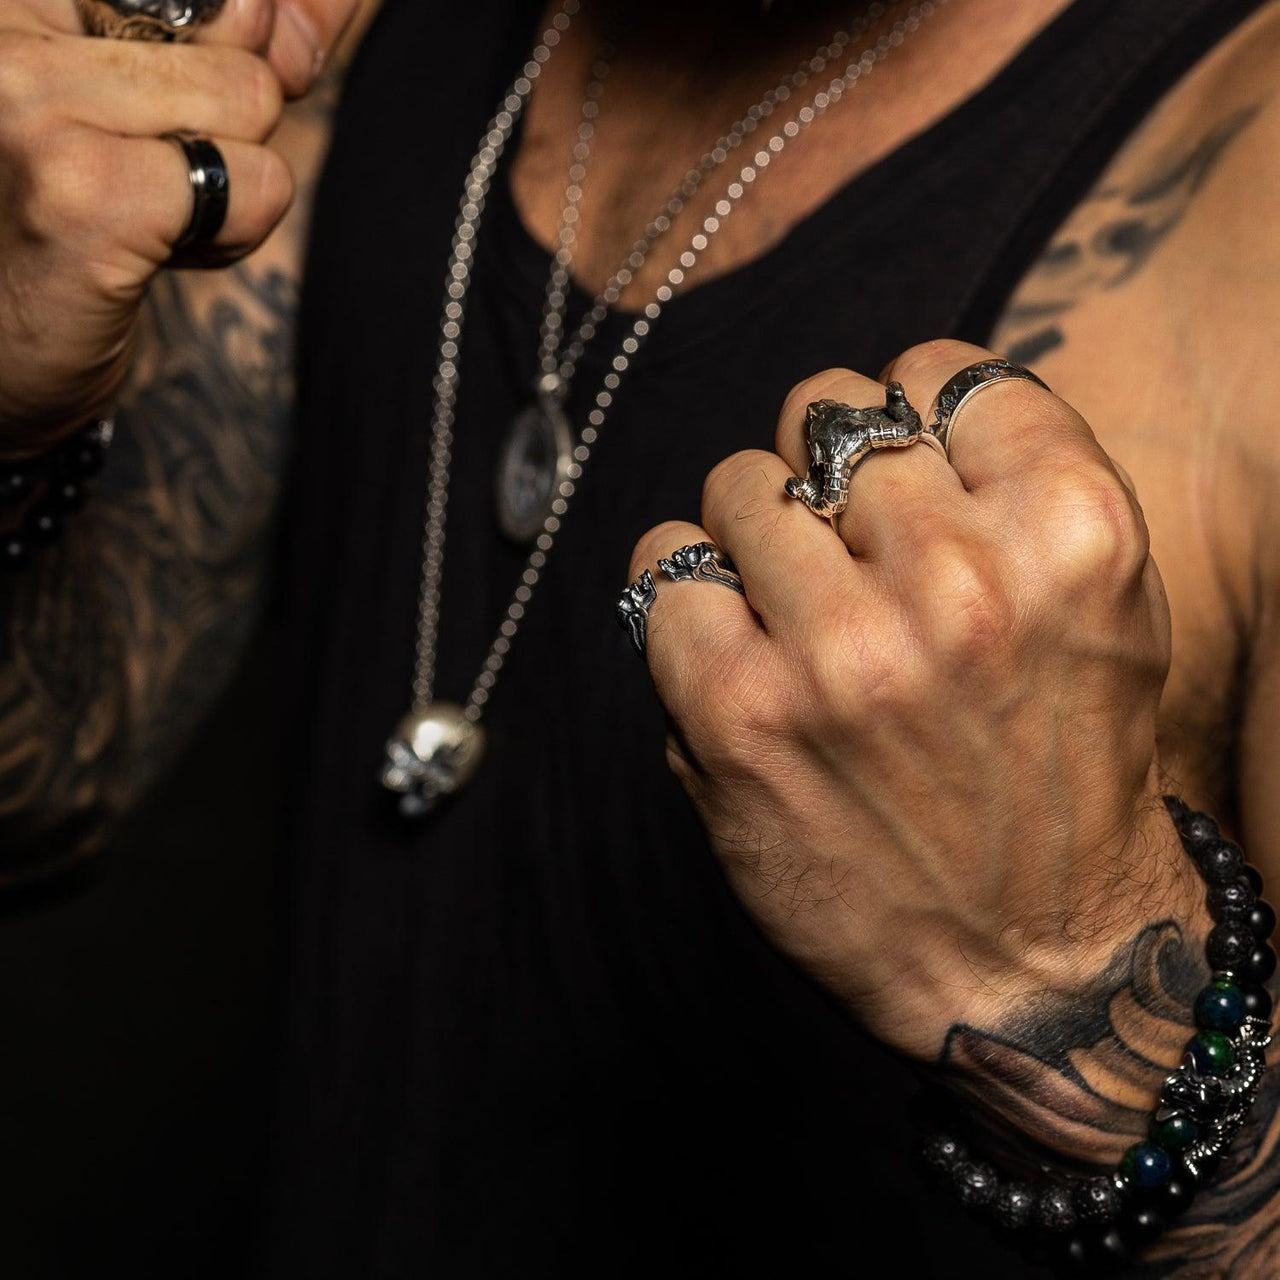 Ben Poole wearing Black Feather Design Gothic Jewellery